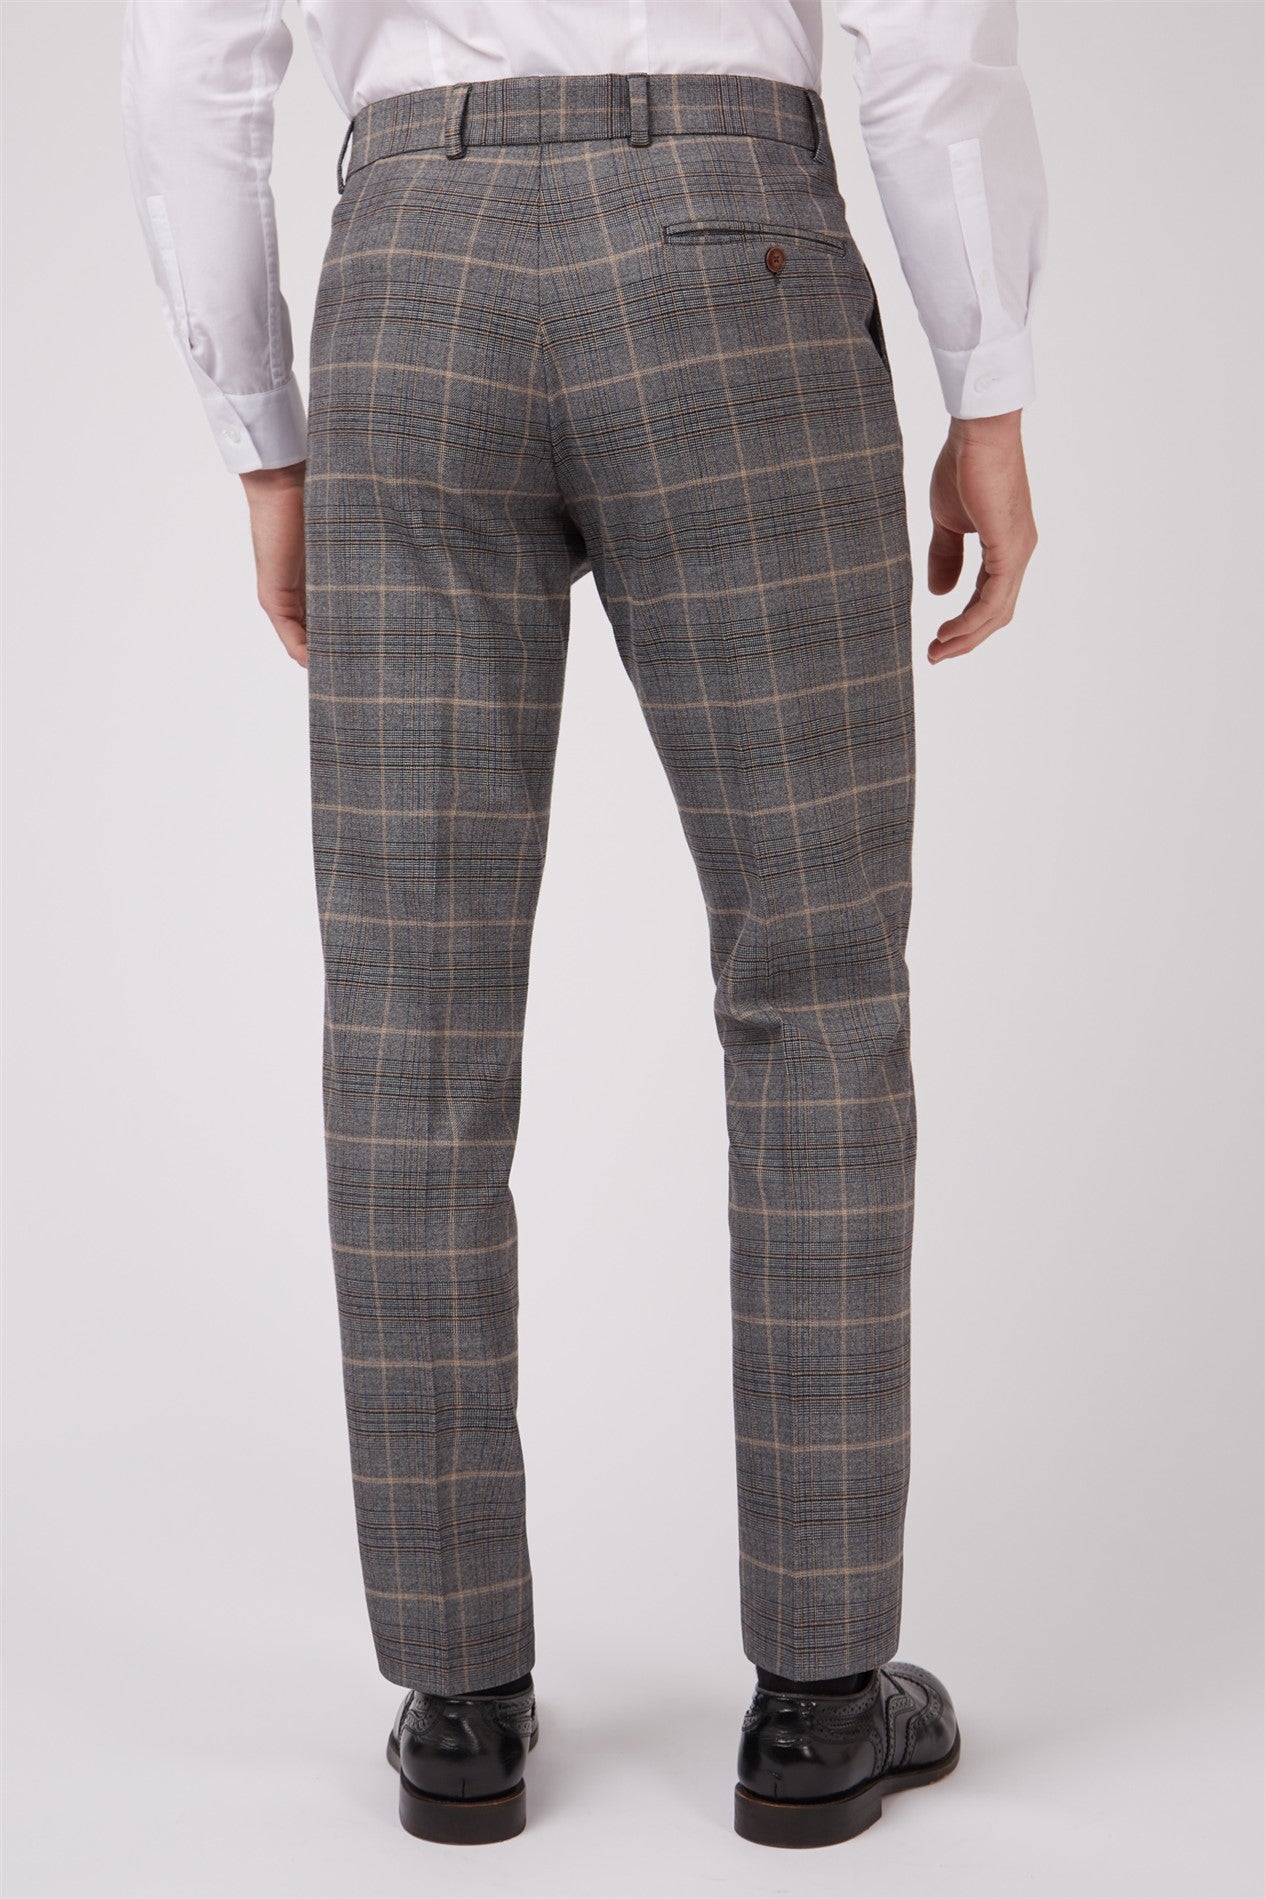 Grey and Tan Over Check from Antique Rogue - Trousers